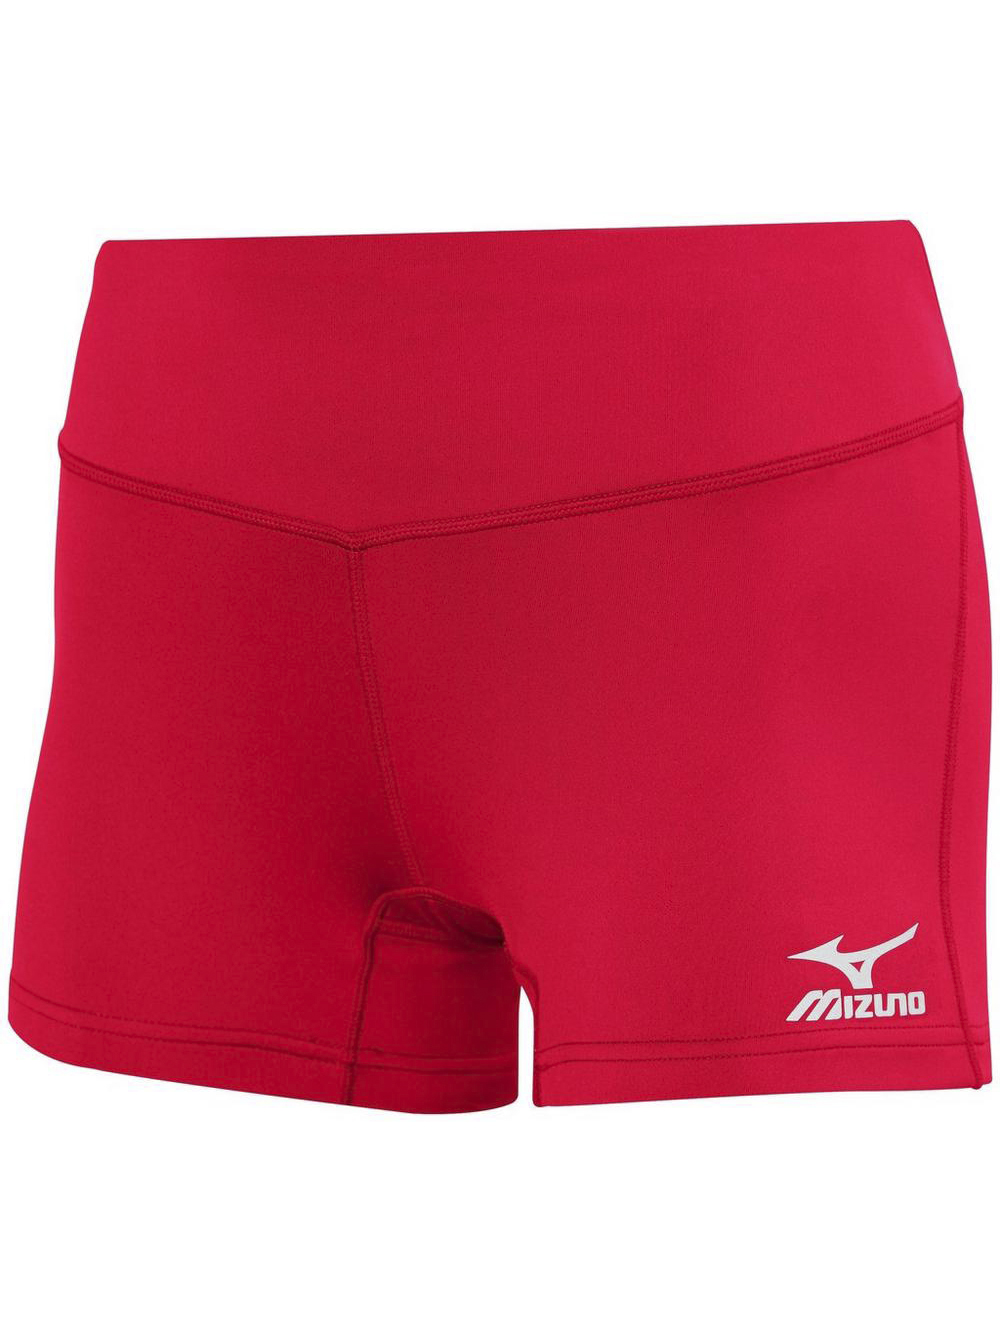 Mizuno Victory Short | Midwest Volleyball Warehouse